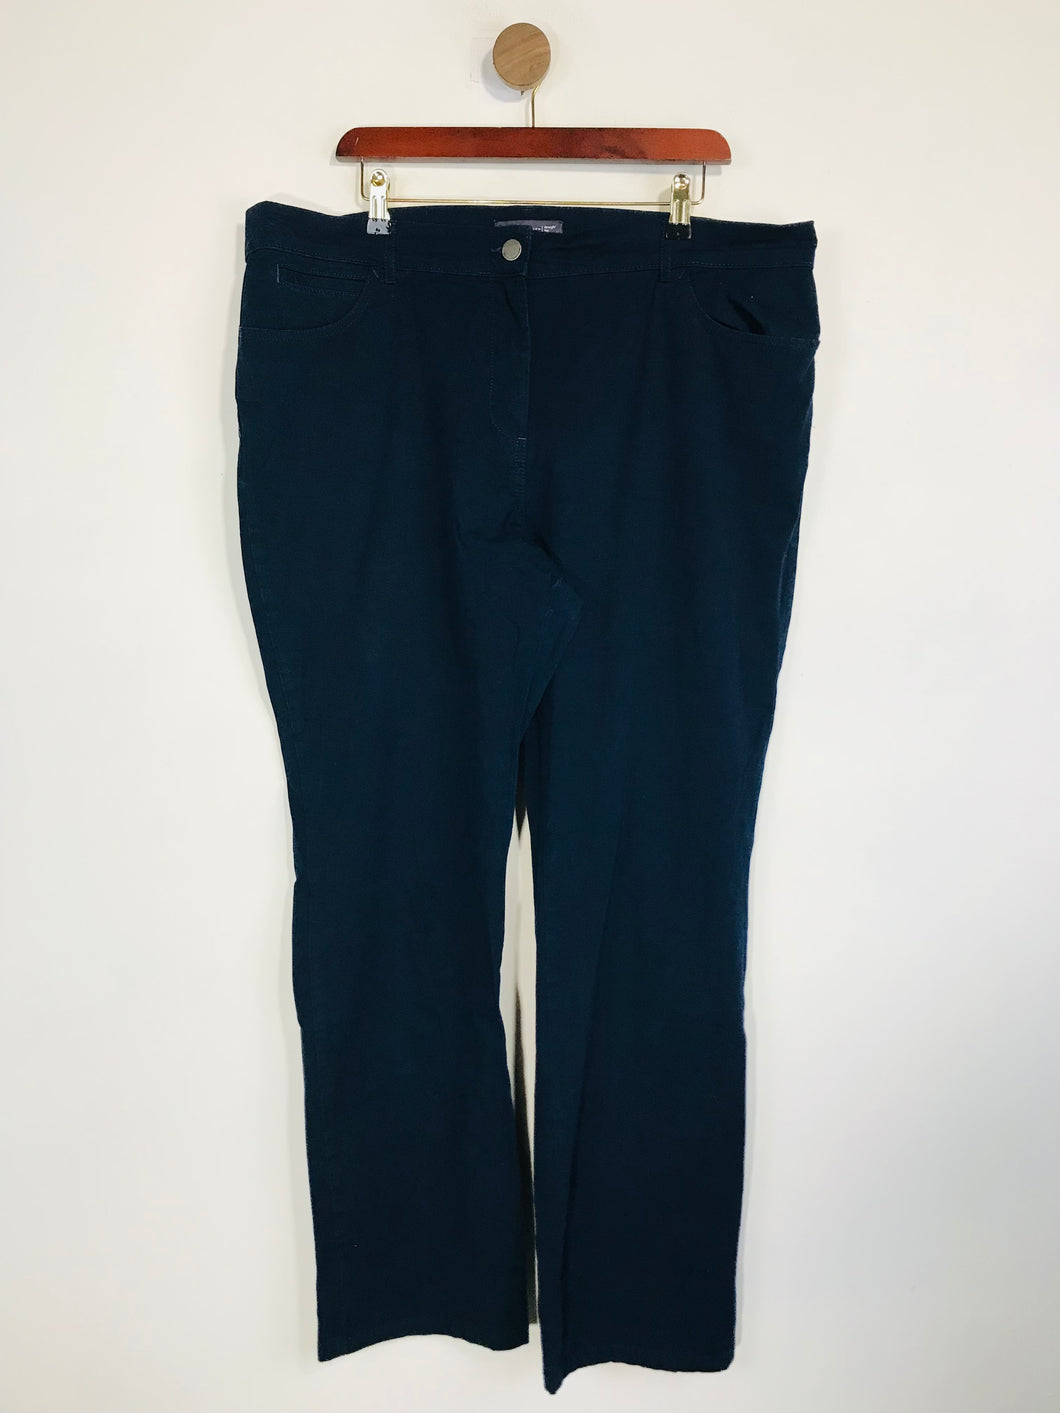 M&S Women's Cotton Chinos Trousers | UK20 | Blue